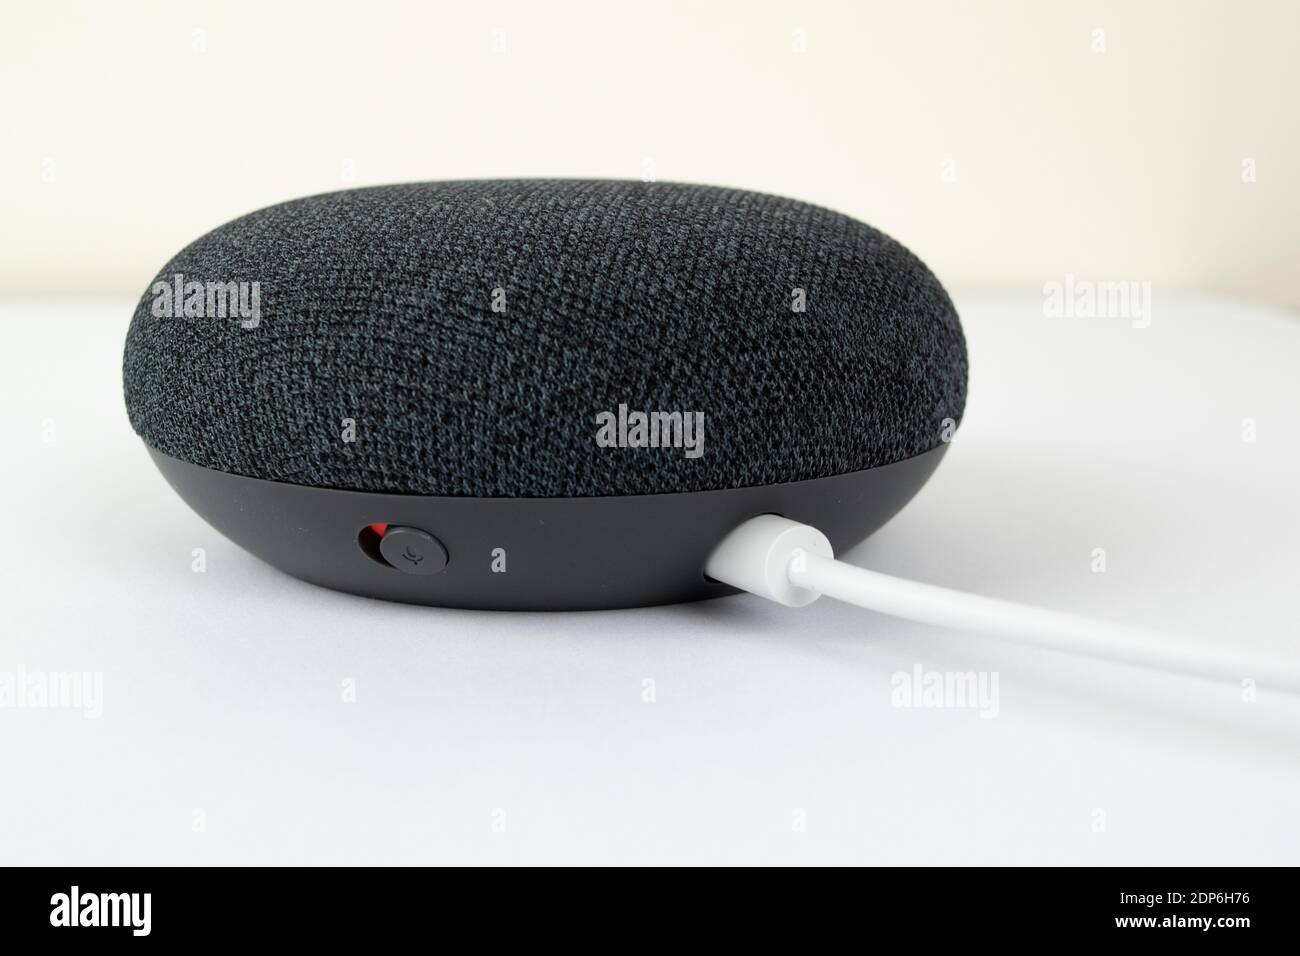 London, United Kingdom - 19 December 2020: Charcoal Google Nest Home Mini smart speaker with built in Google Assistant on a white background. Stock Photo